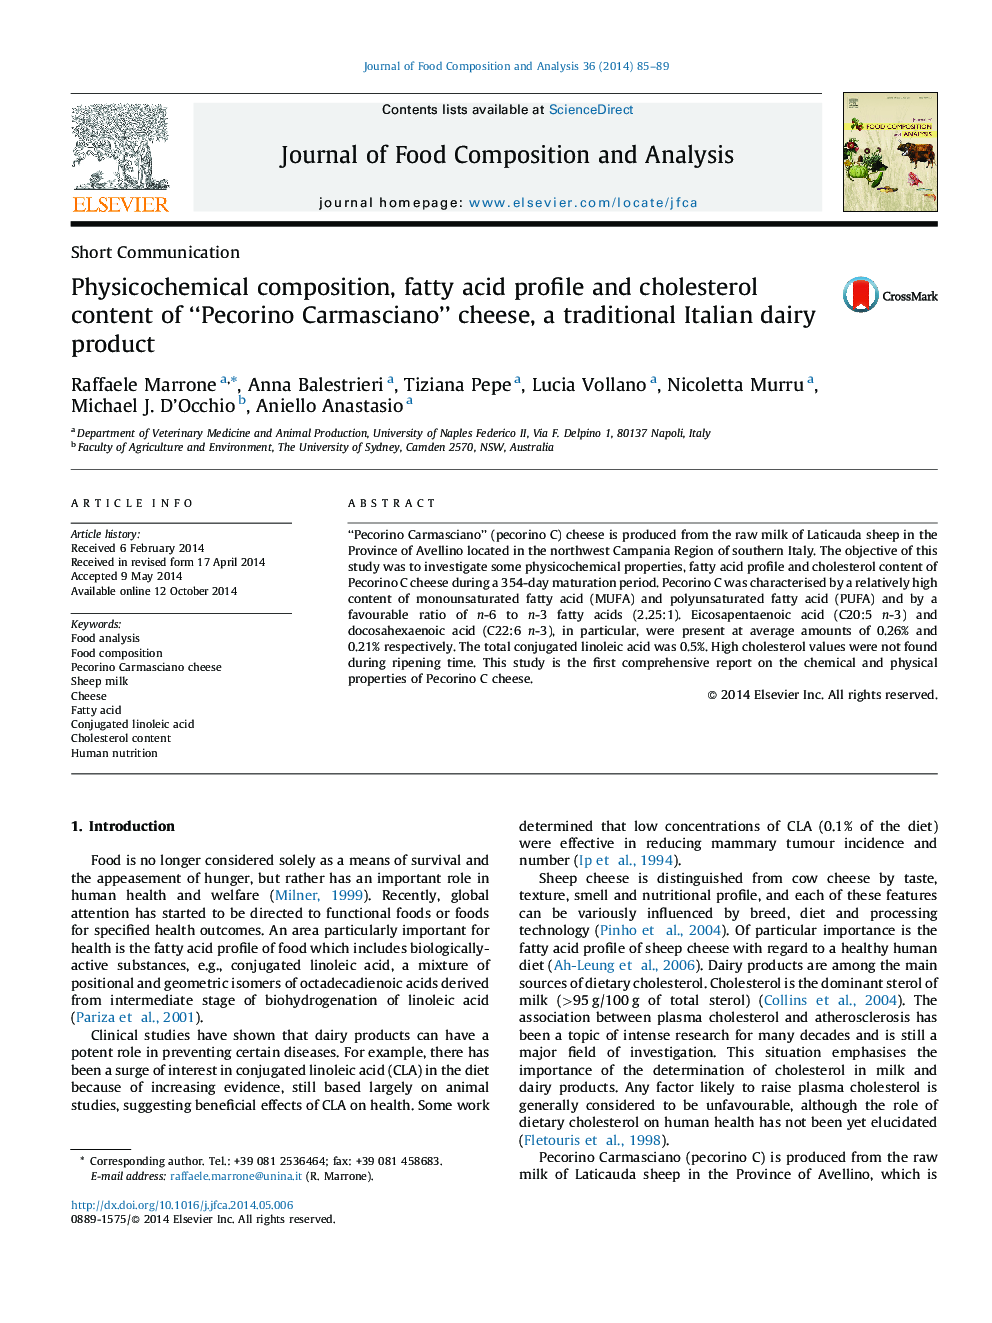 Physicochemical composition, fatty acid profile and cholesterol content of “Pecorino Carmasciano” cheese, a traditional Italian dairy product